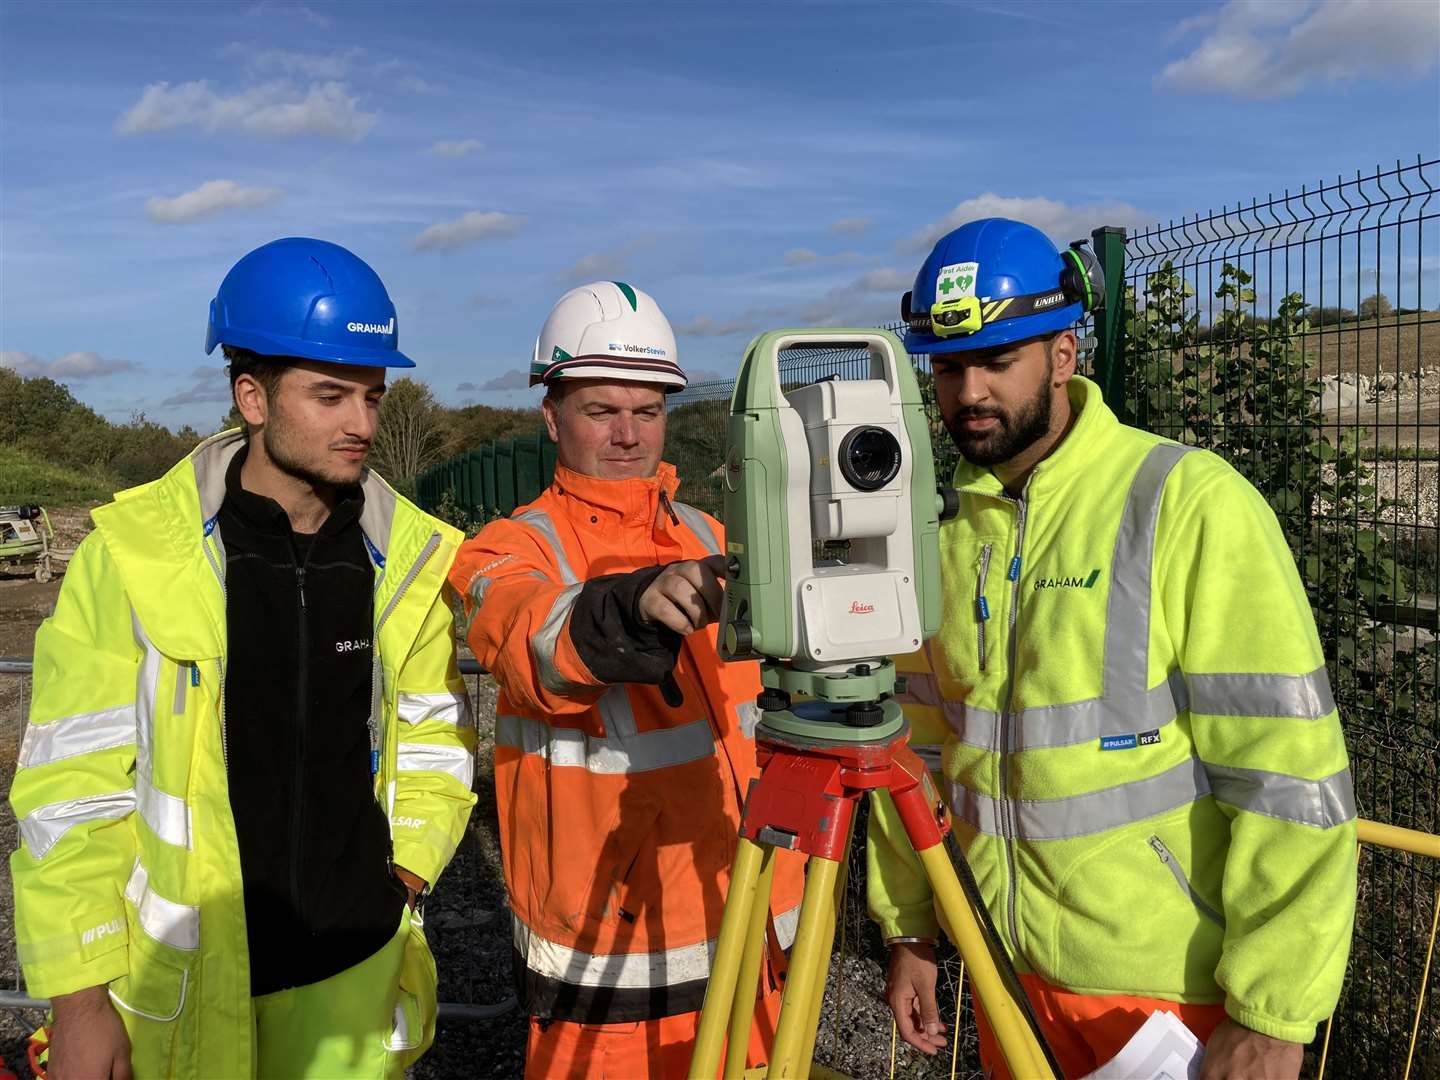 Civil engineering degree students Taimur Kham, 20, (left) from Leeds and Vinay Chawla, 20, (right) from Birmiingham get some practical experience on the M2 A249 construction site at Stockbury from tutor Paul Clarkson. Picture: John Nurden (60444911)